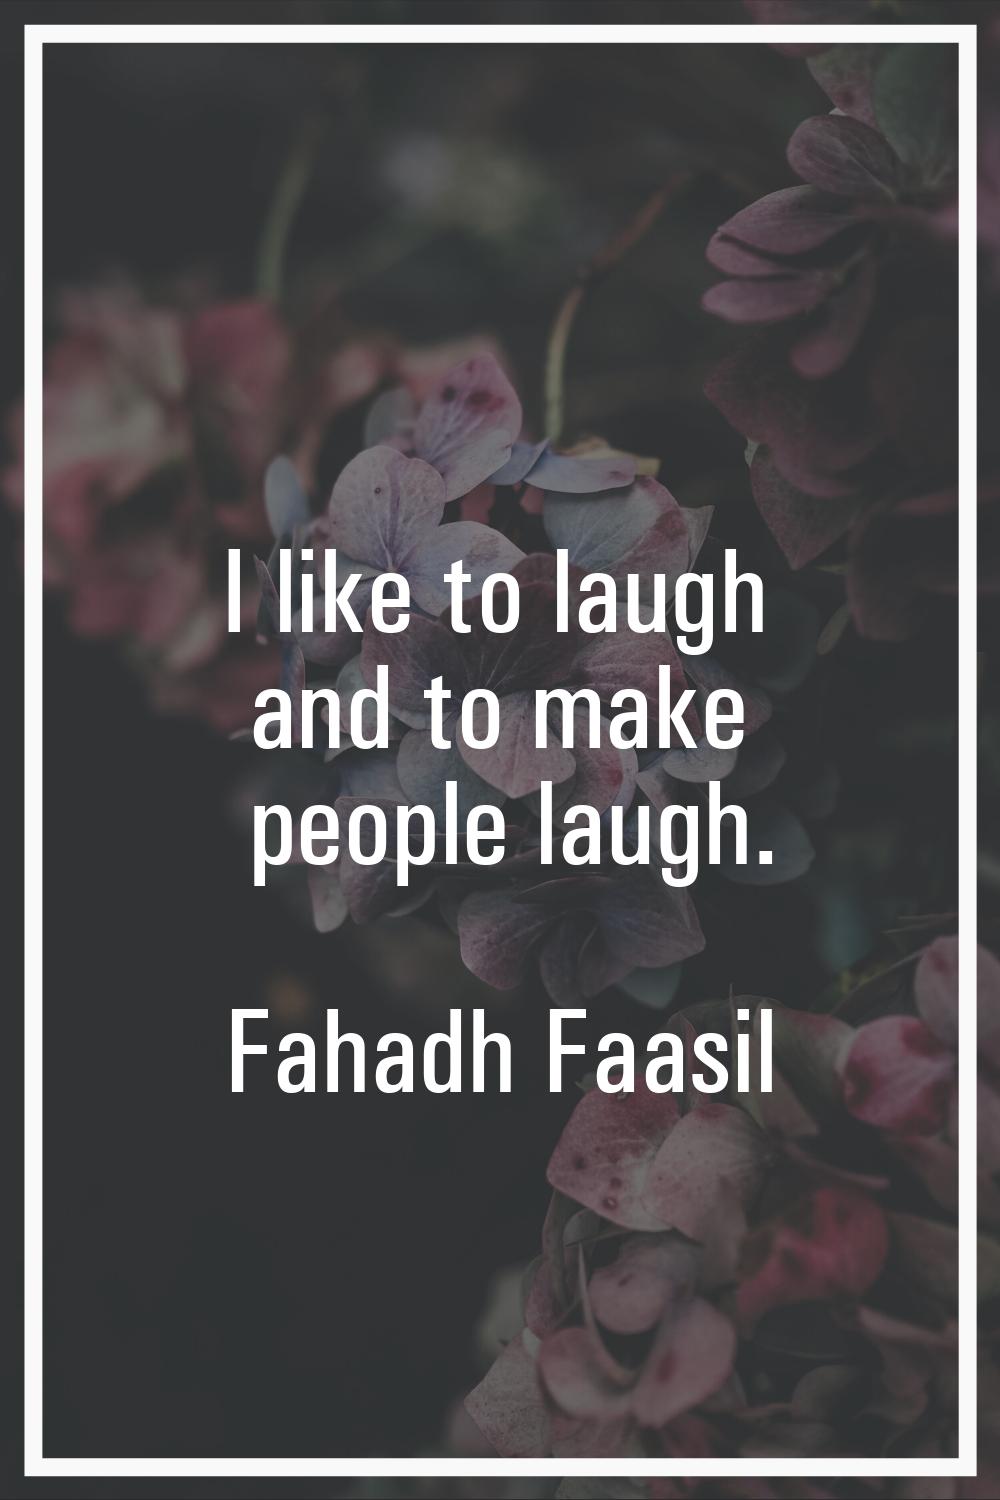 I like to laugh and to make people laugh.